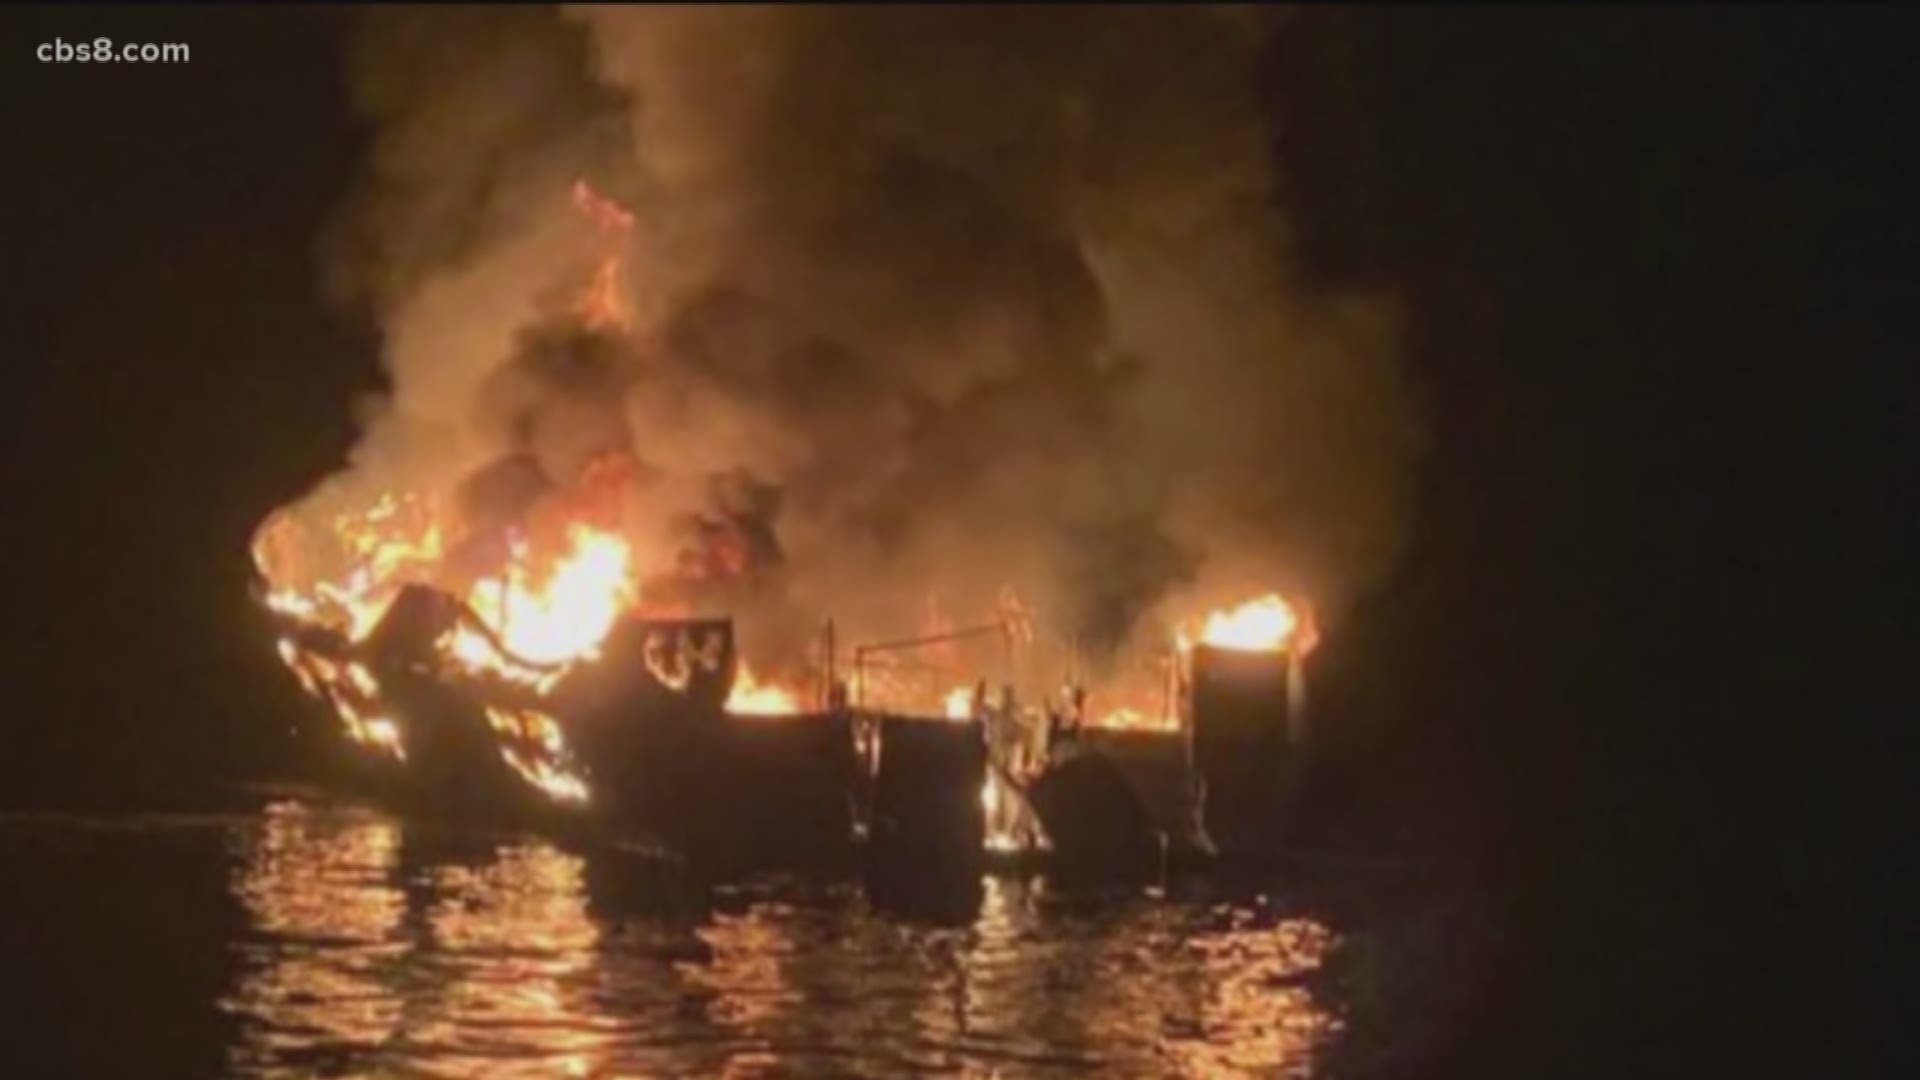 Dozens of people trapped on a scuba diving boat that caught fire off the Southern California coast appear to have died from smoke inhalation, not burns, authorities said Friday.